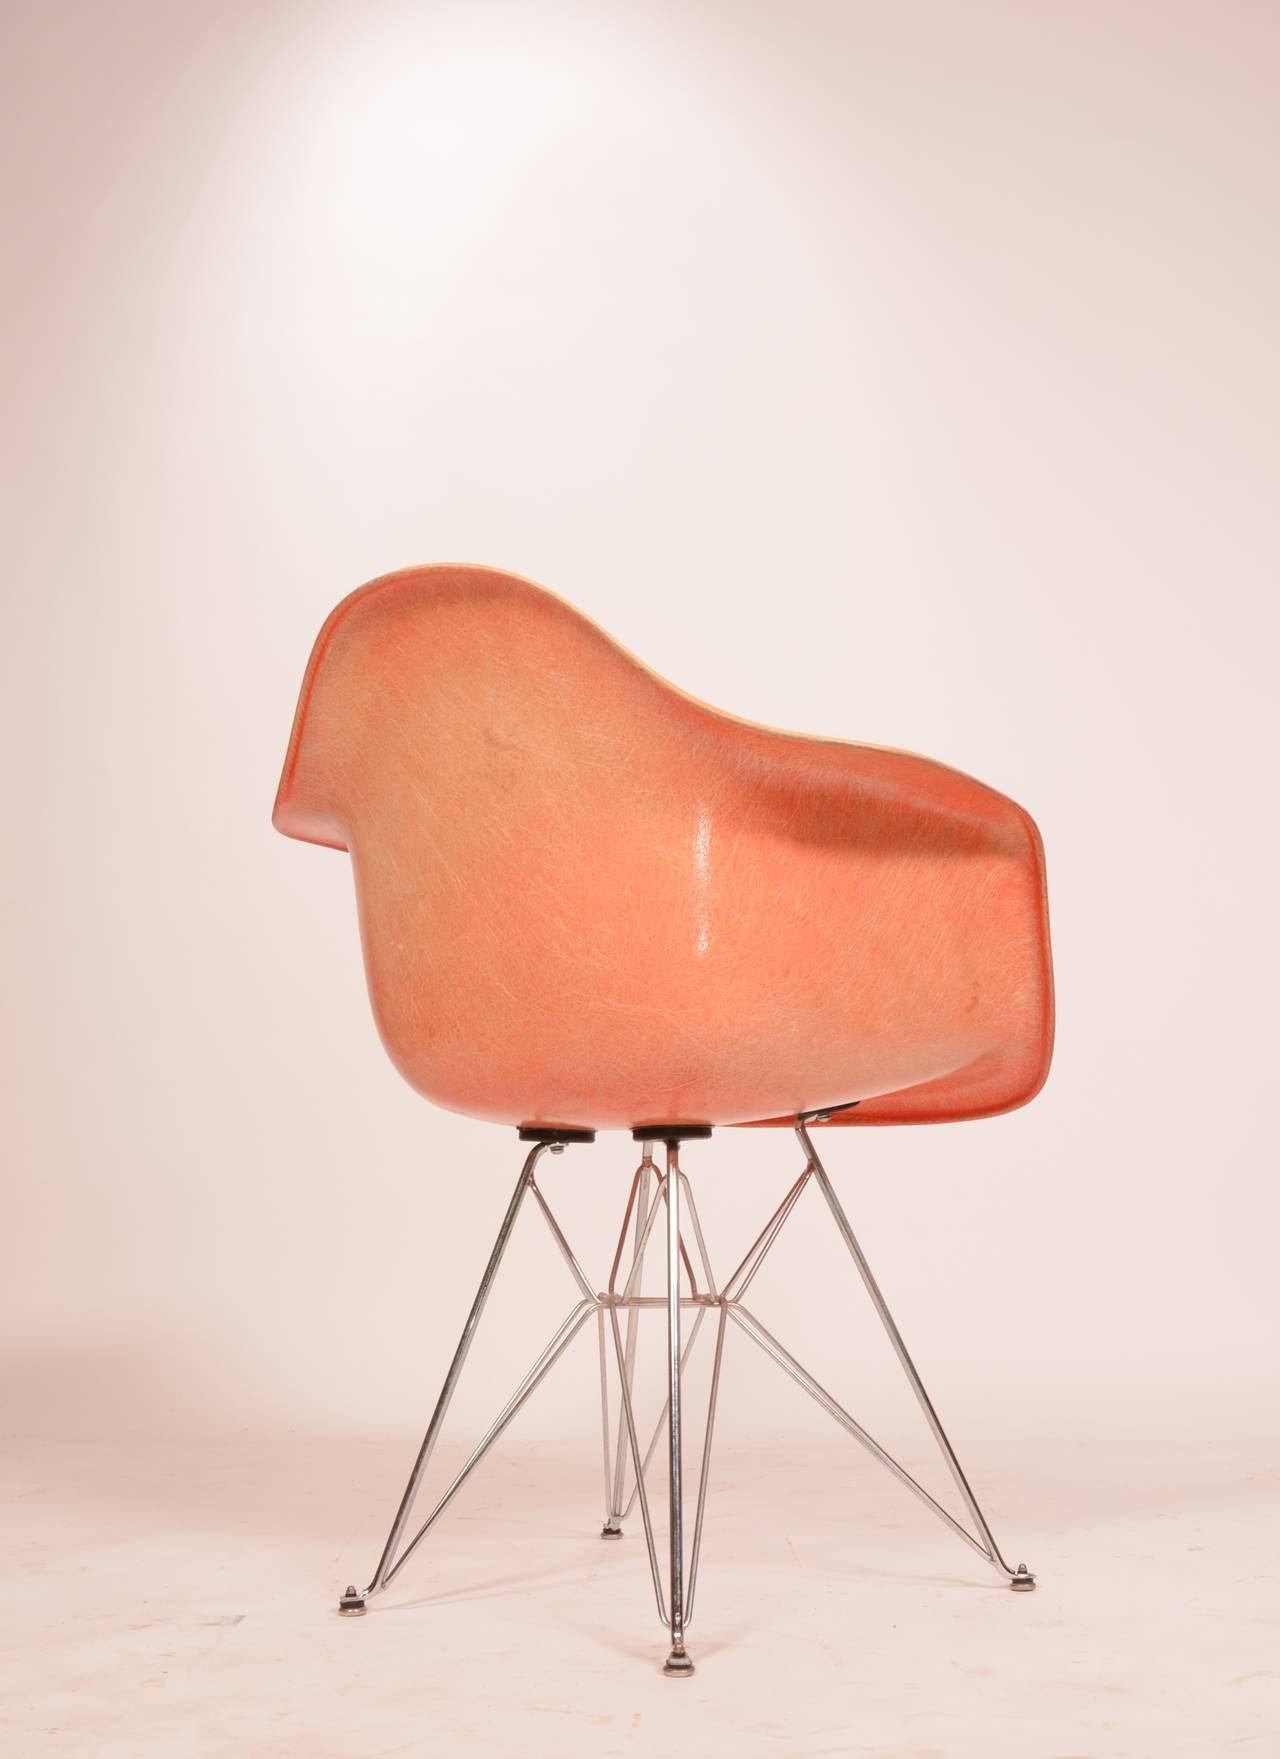 This is a rare early roped edge Eames chair made by Zenith plastics/ Herman Miller in great condition. The chair retains the original label although it is worn.